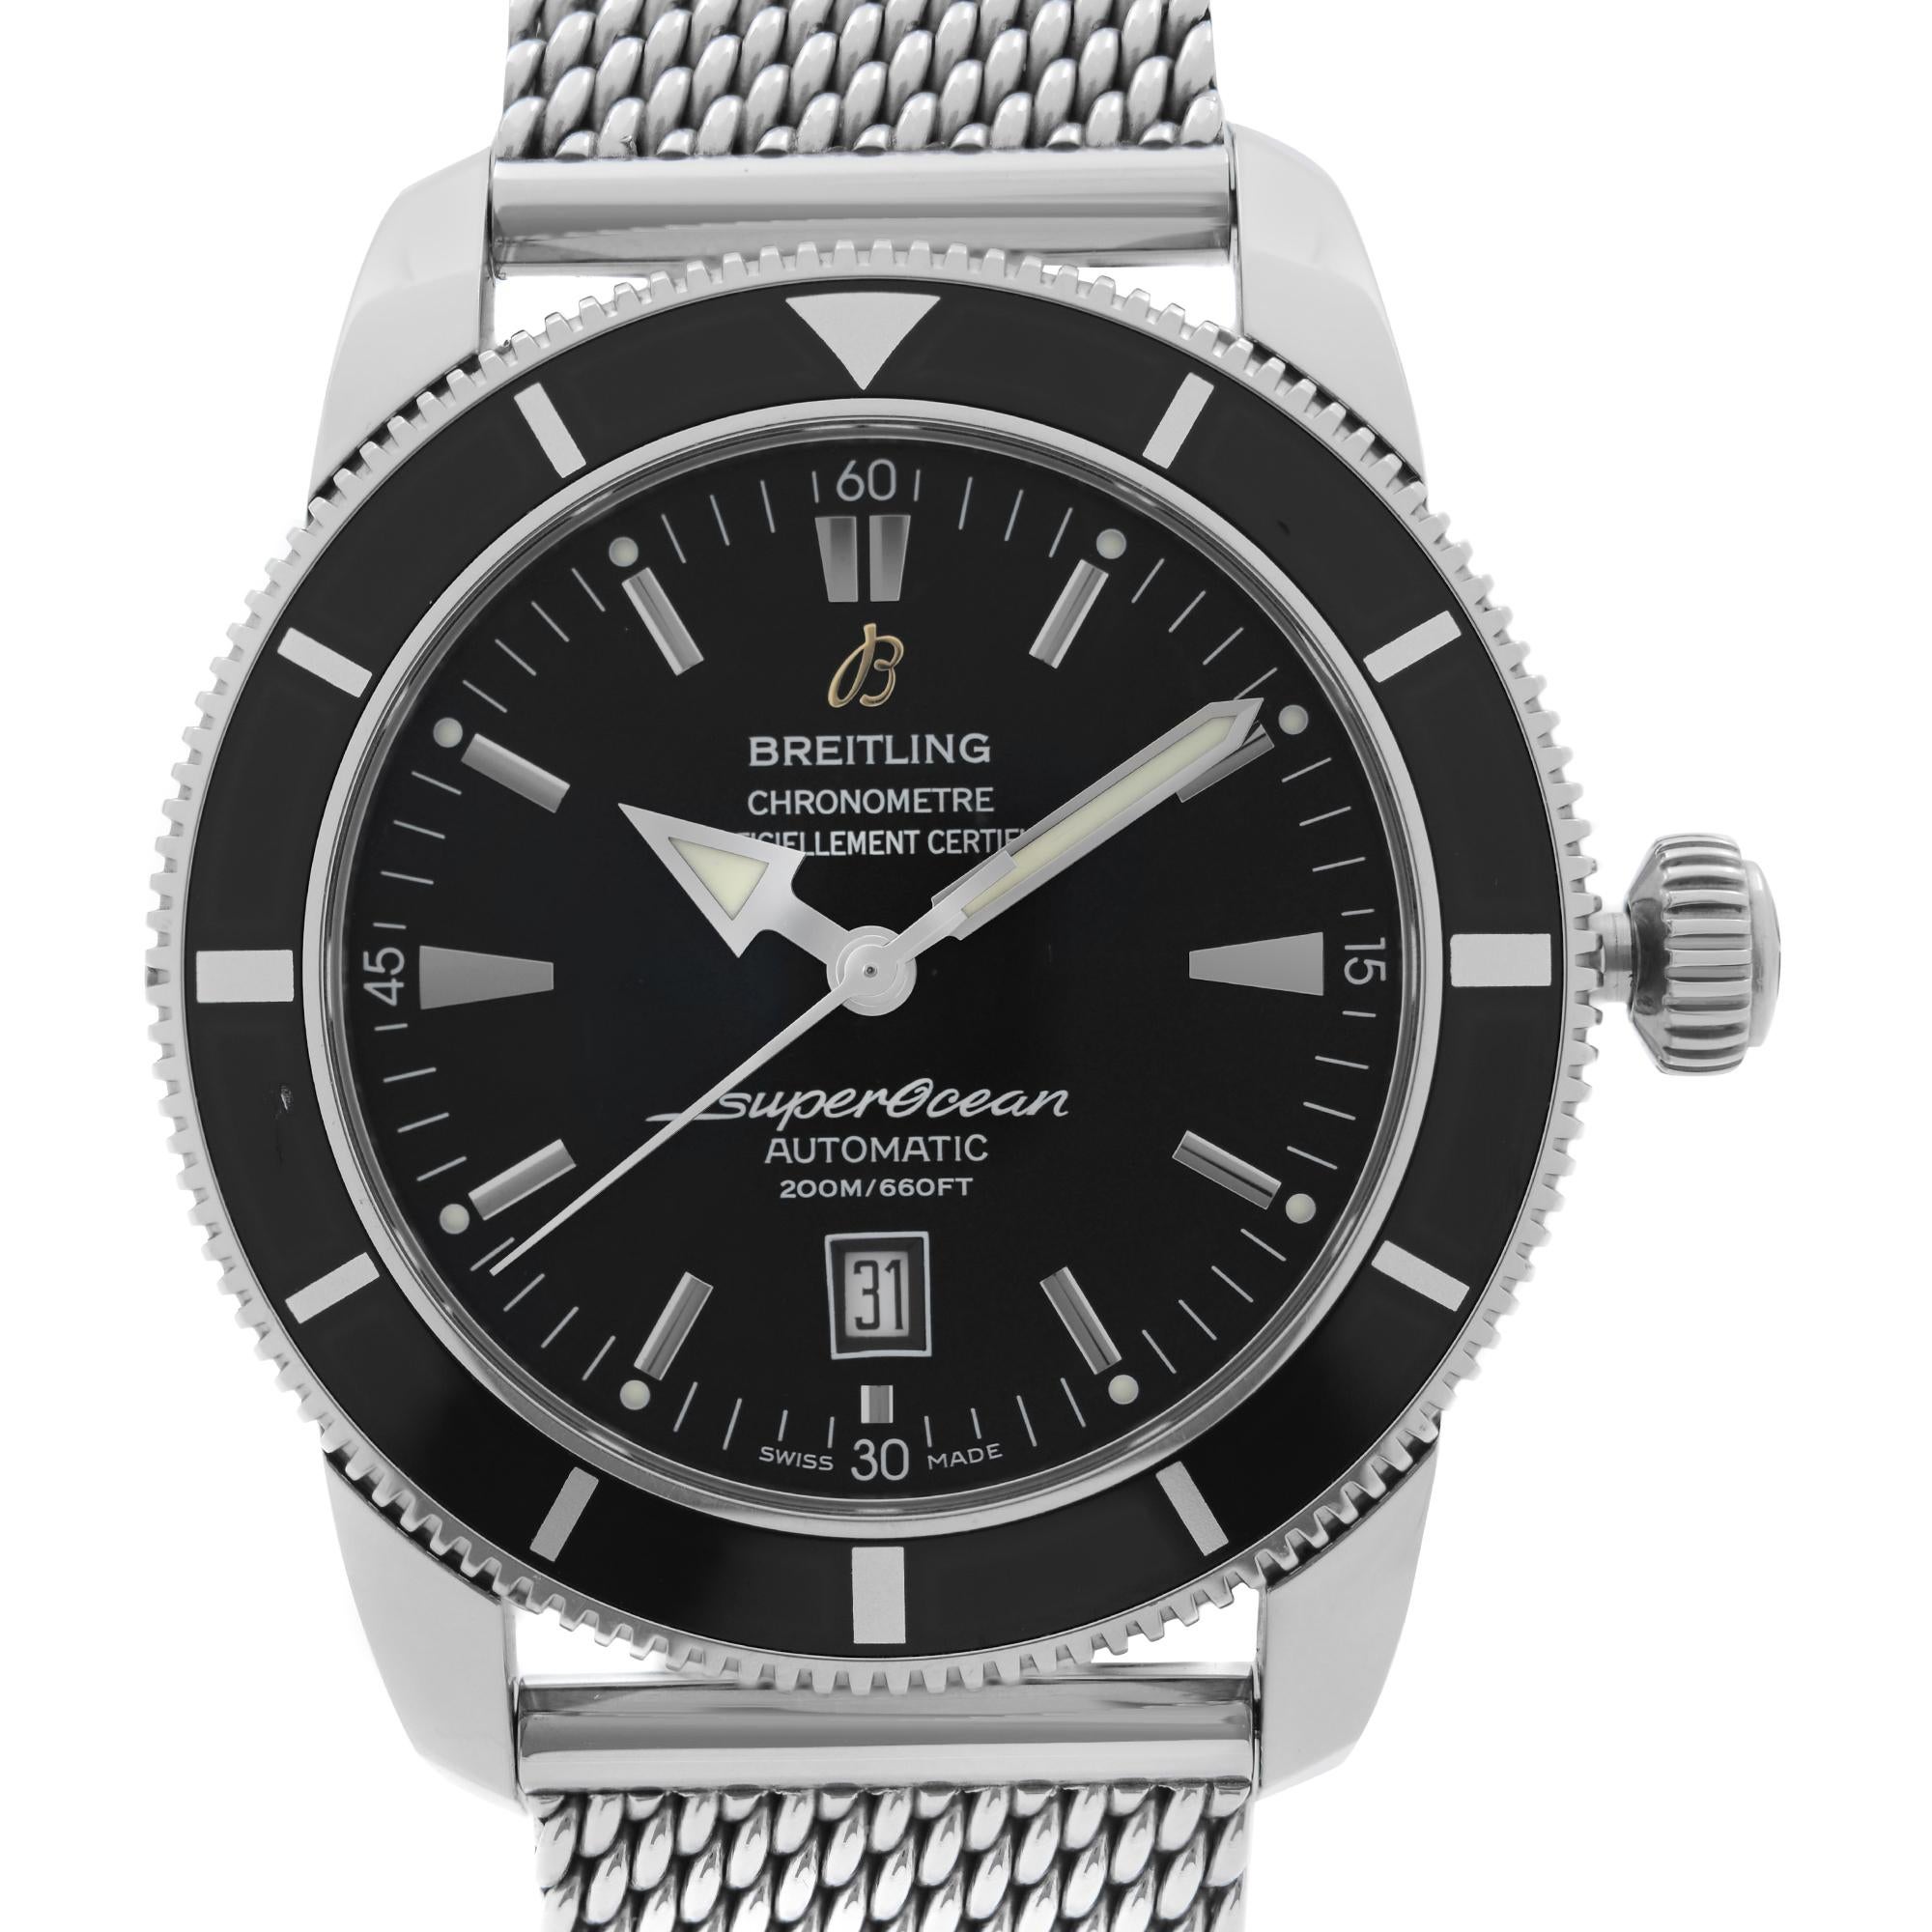 Pre Owned Breitling Superocean Heritage 46mm Stainless Steel Black Dial Automatic Mens Watch A17320. This Watch Shows Deep Scratch on the Bezel insert between 8 and 9 indices and a tiny unnoticeable blemish on the Bezel insert between 1 and 2